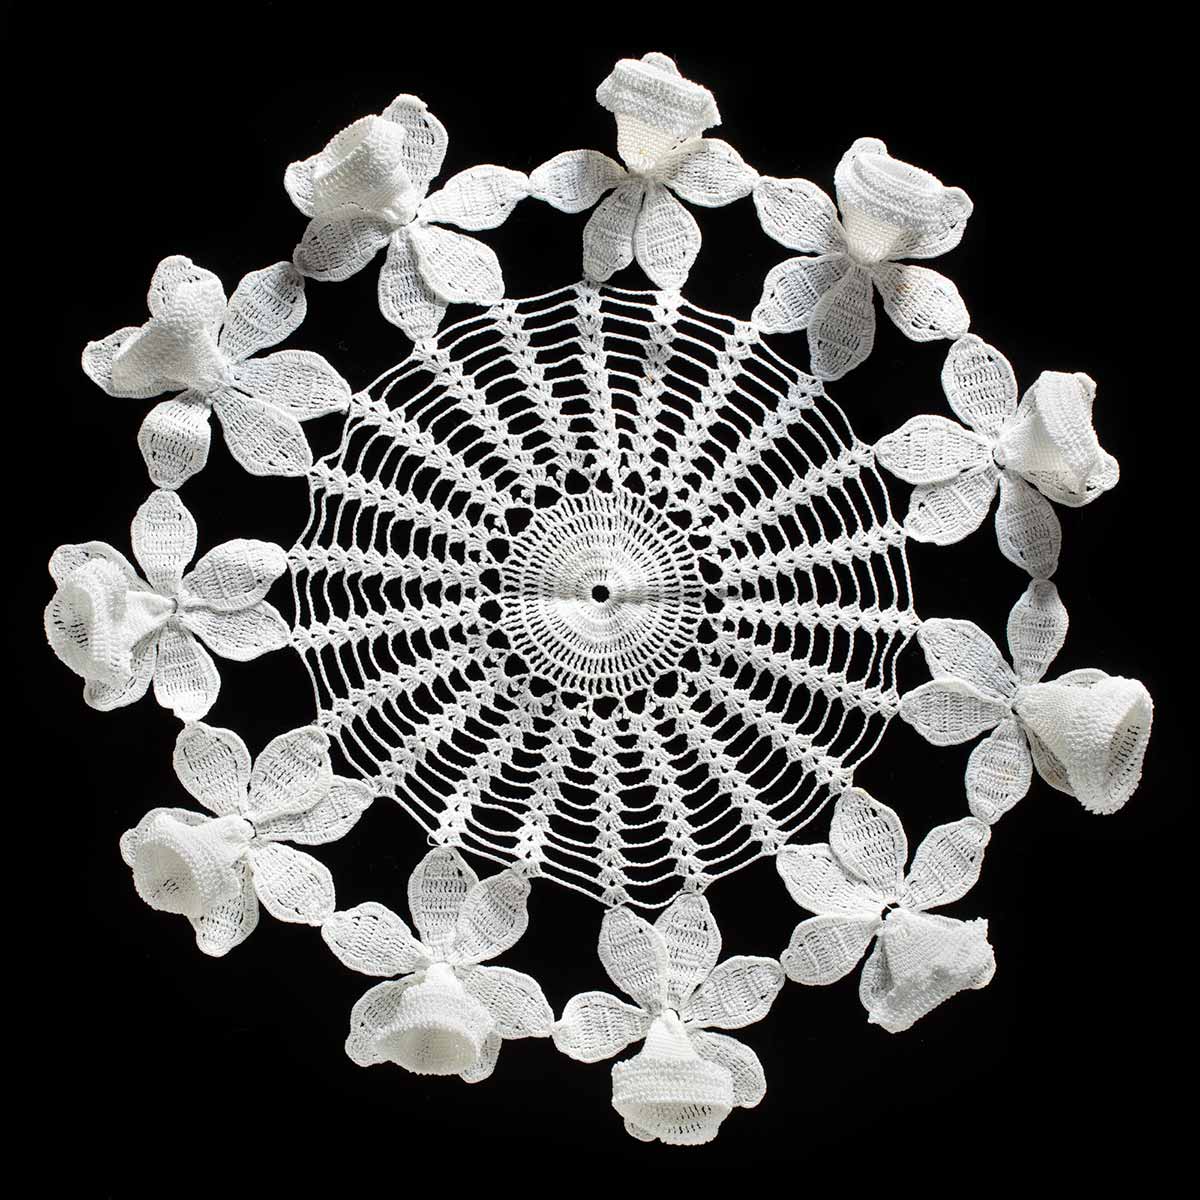 Round white crocheted doily on a black background. The centre and middle of the doily is made with a detailed web-like design. Around the edges of the doily are 11 crocheted three-dimensional daffodils. - click to view larger image